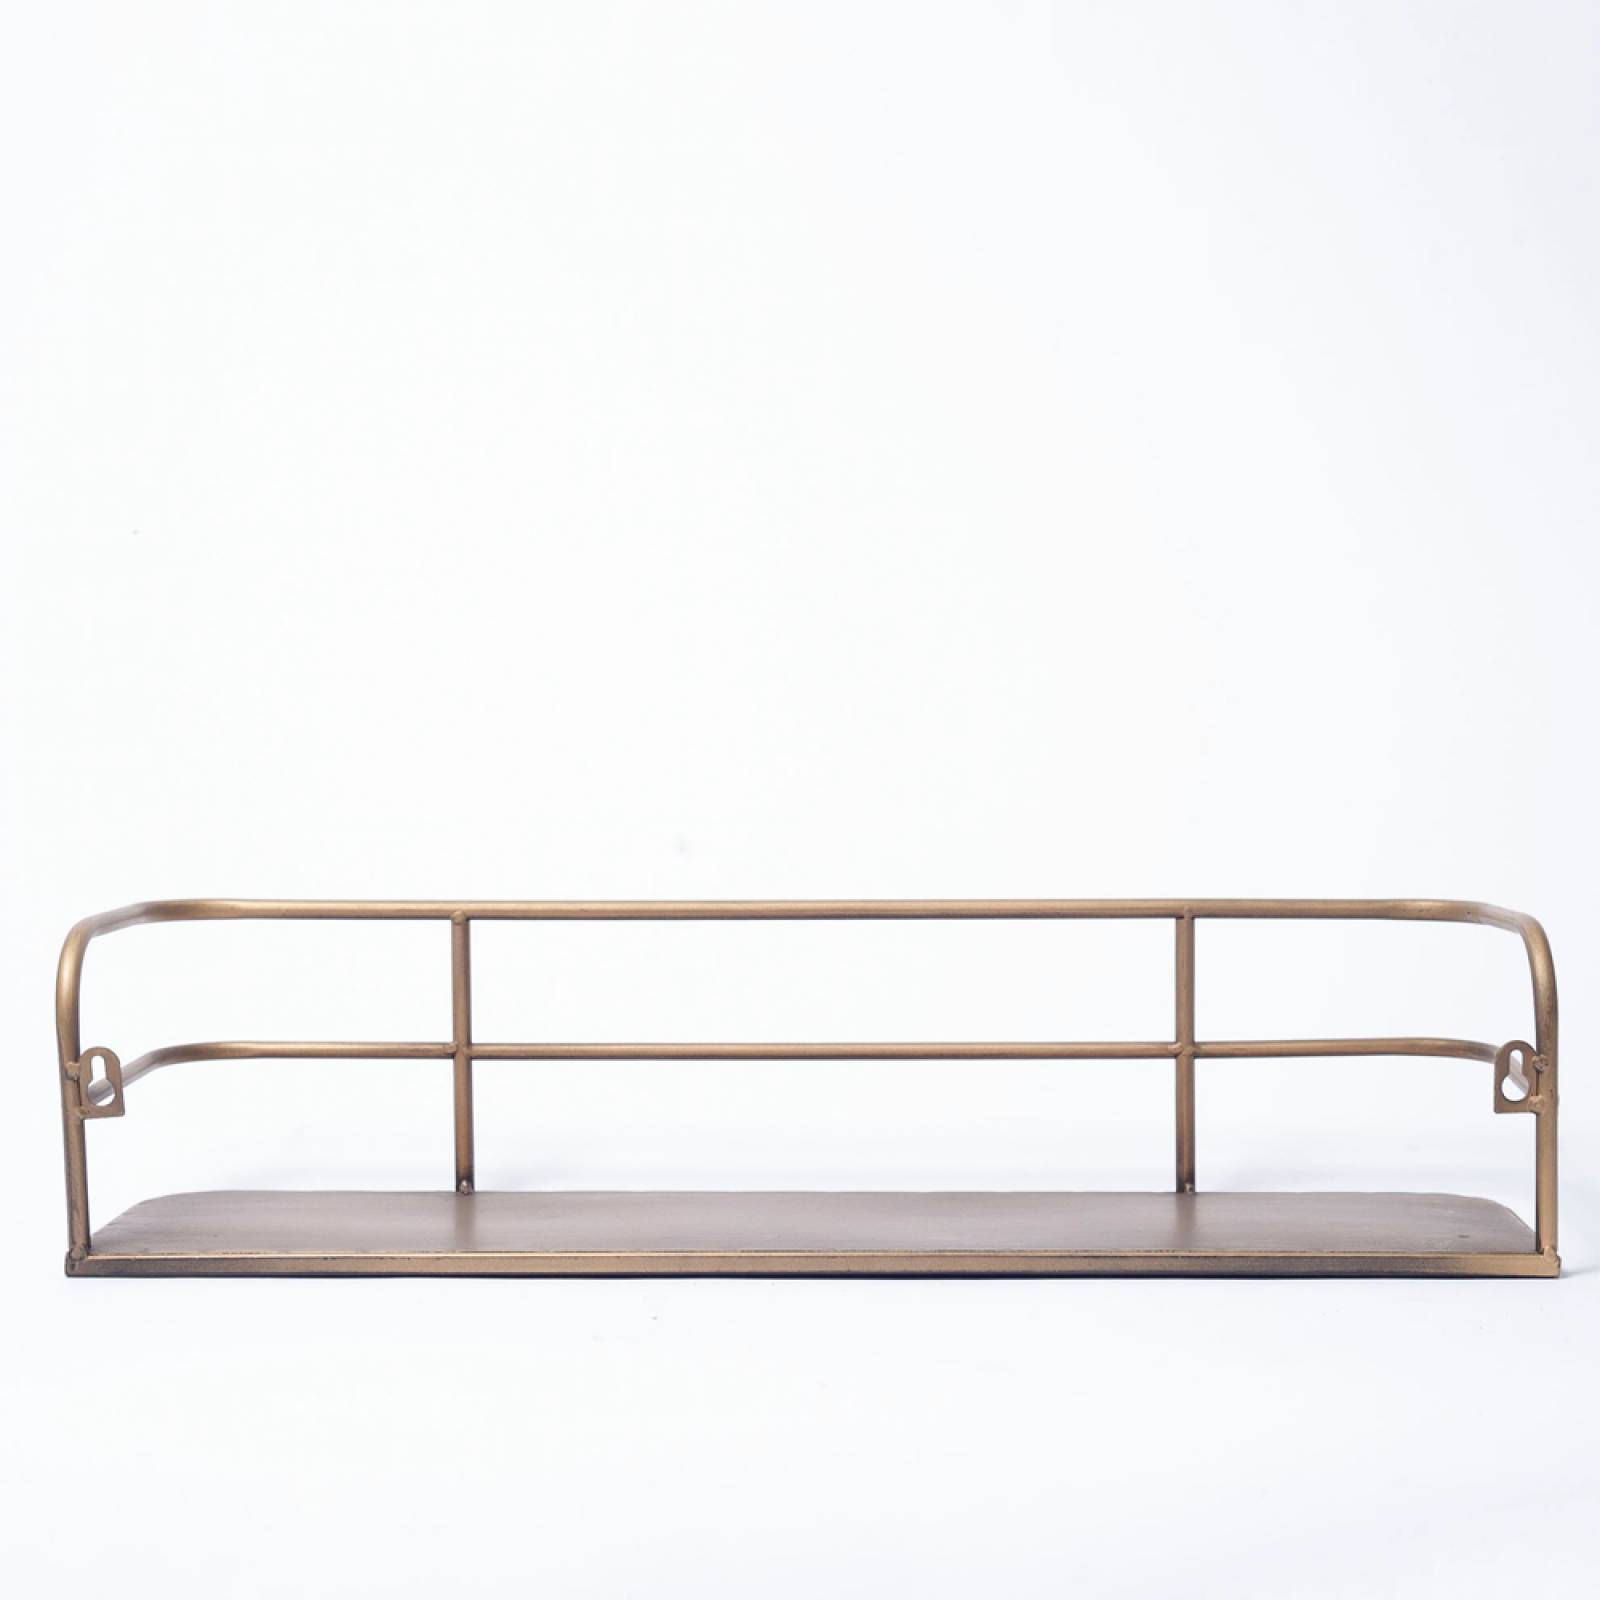 Small Gold Wall Mounting Metal Shelf With Rails 55x15cm thumbnails